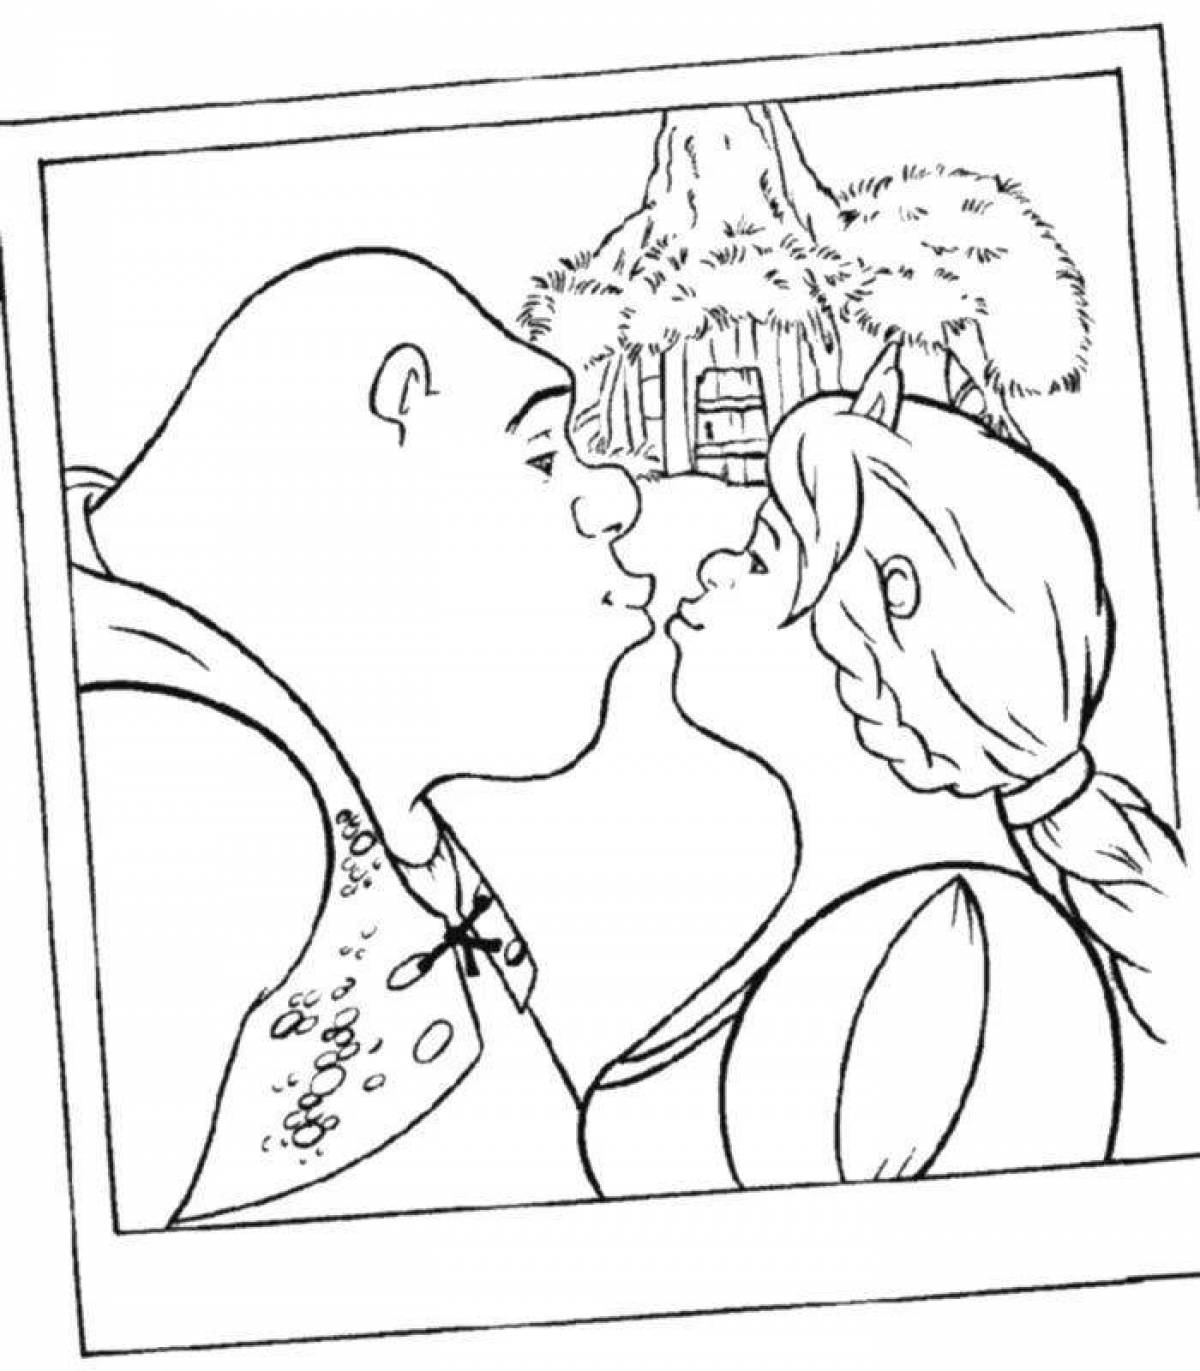 Blissful kiss coloring page